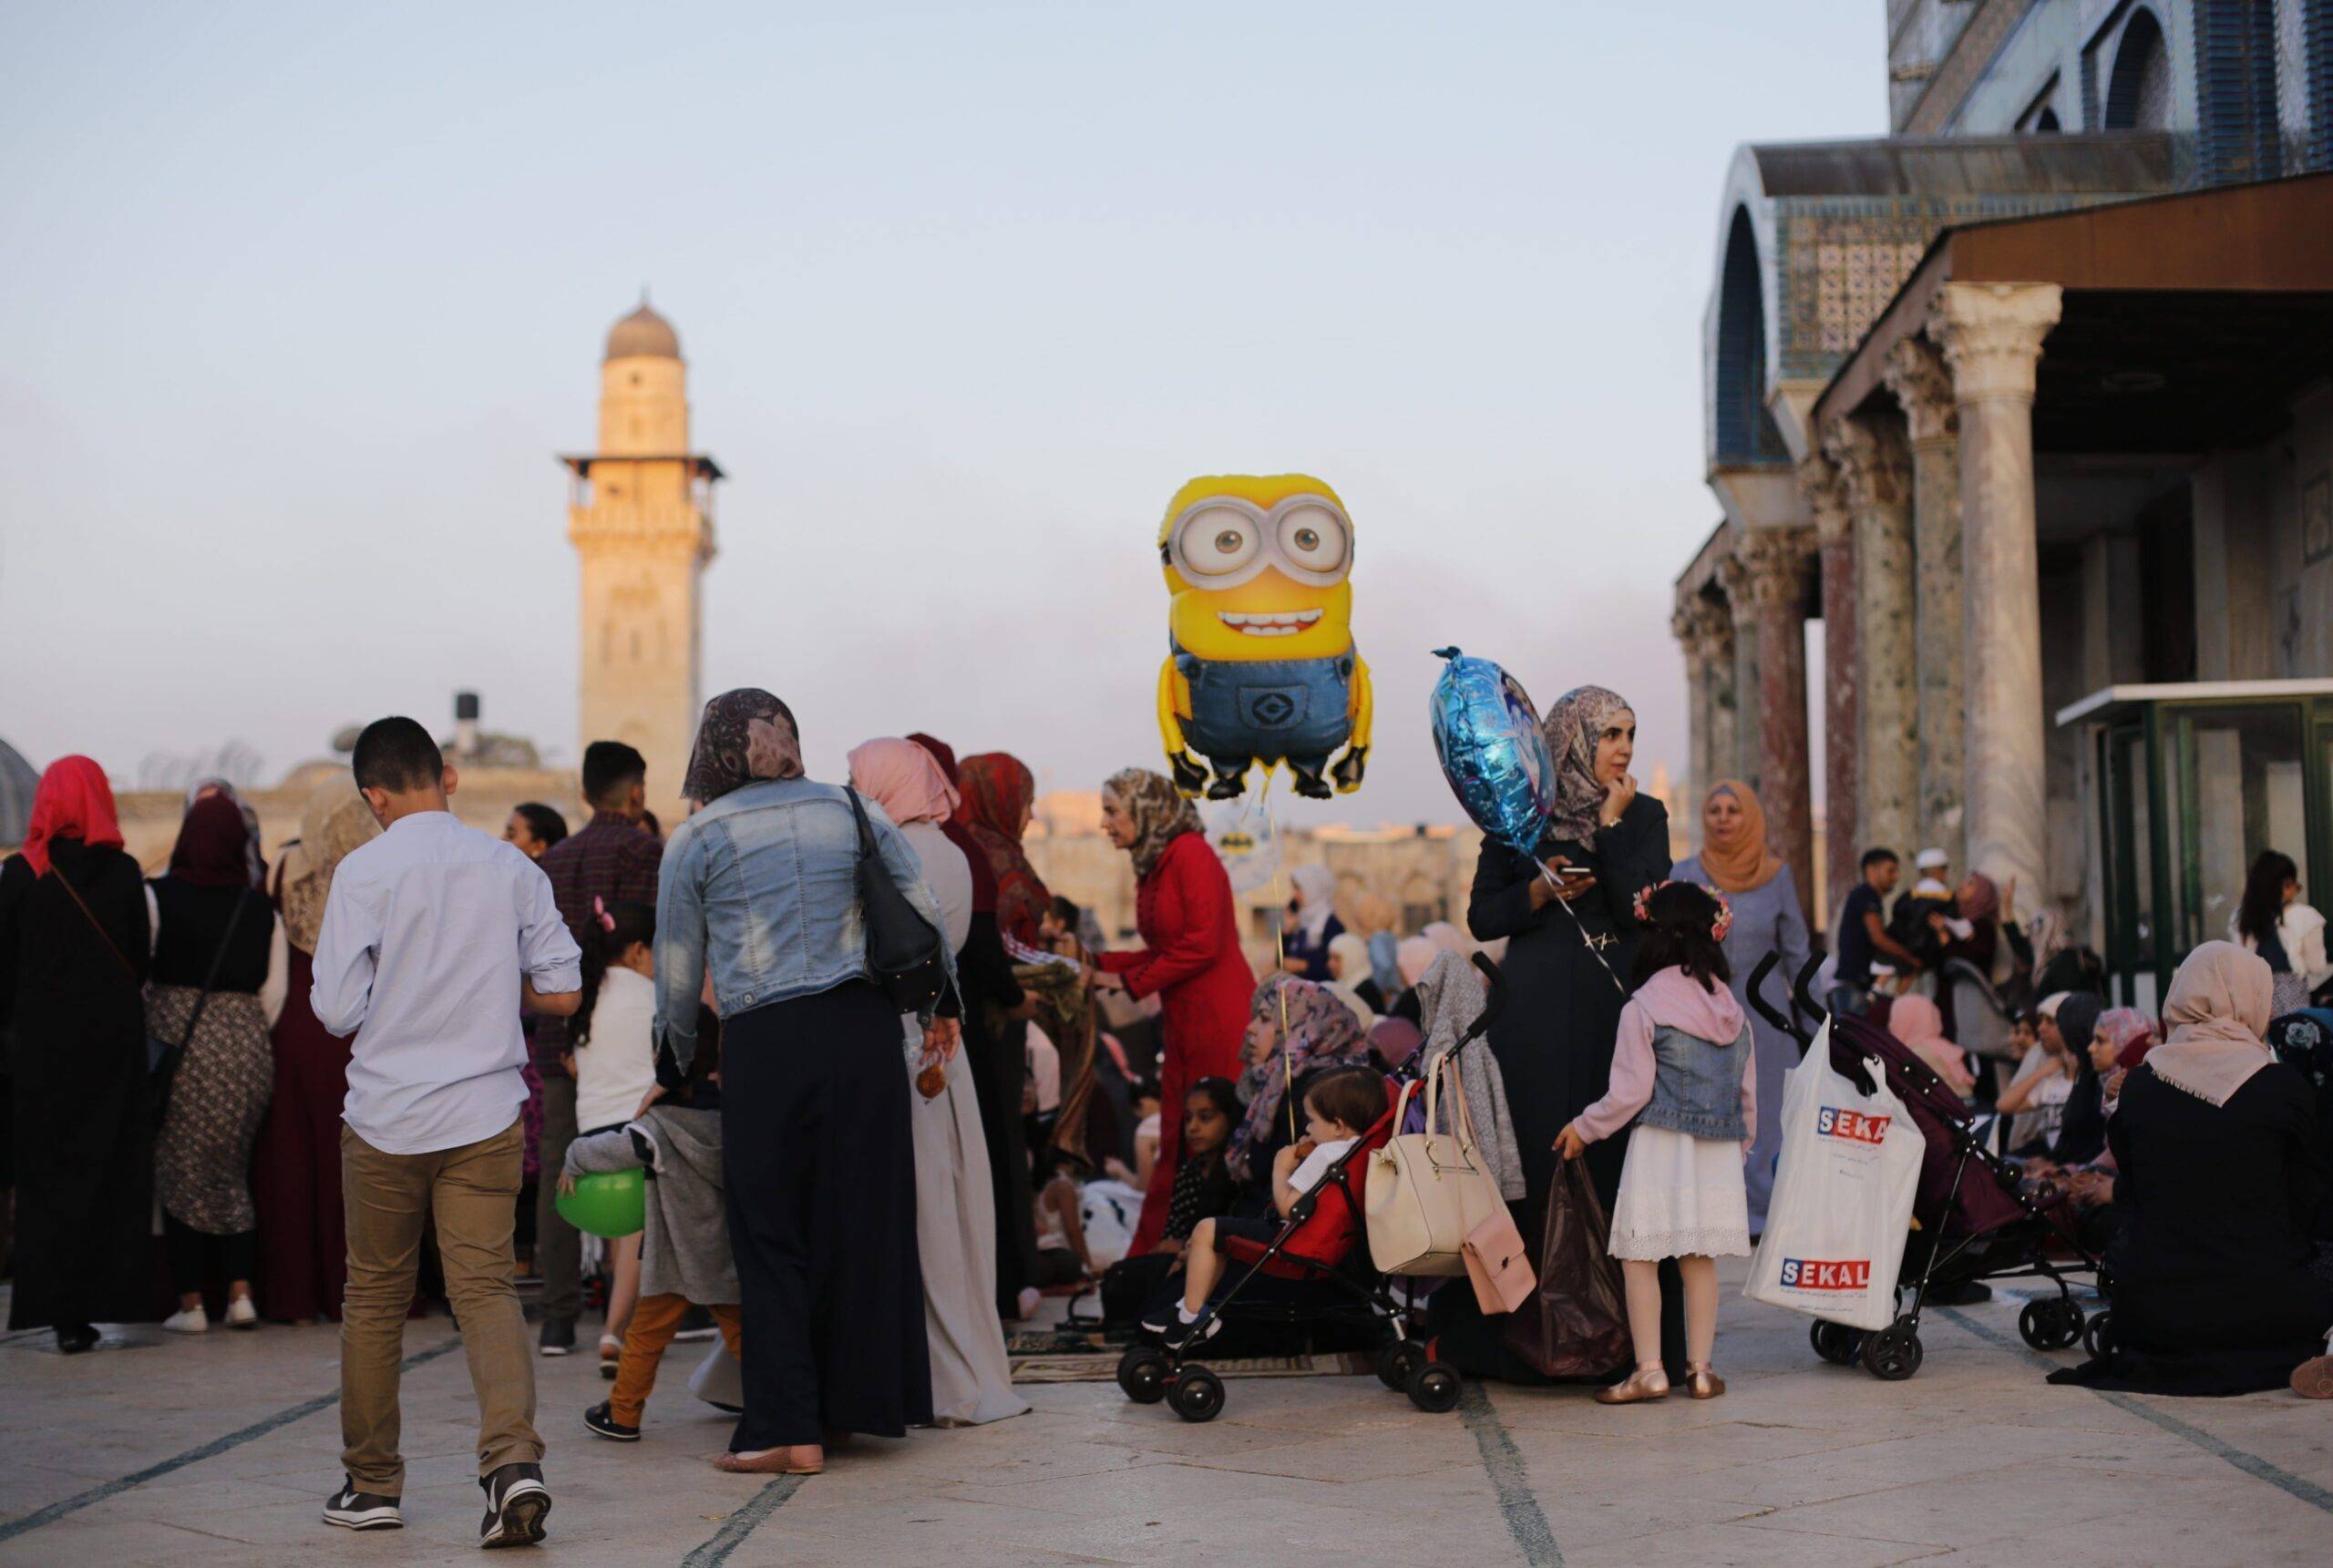 Families buying toys for their children after the Salat al Eid prayer at the Al-Aqsa mosque compound during the first day of the Eid Al Adha in Jerusalem on 21 August, 2018 [Mostafa Alkharouf/AnadoluAgency]